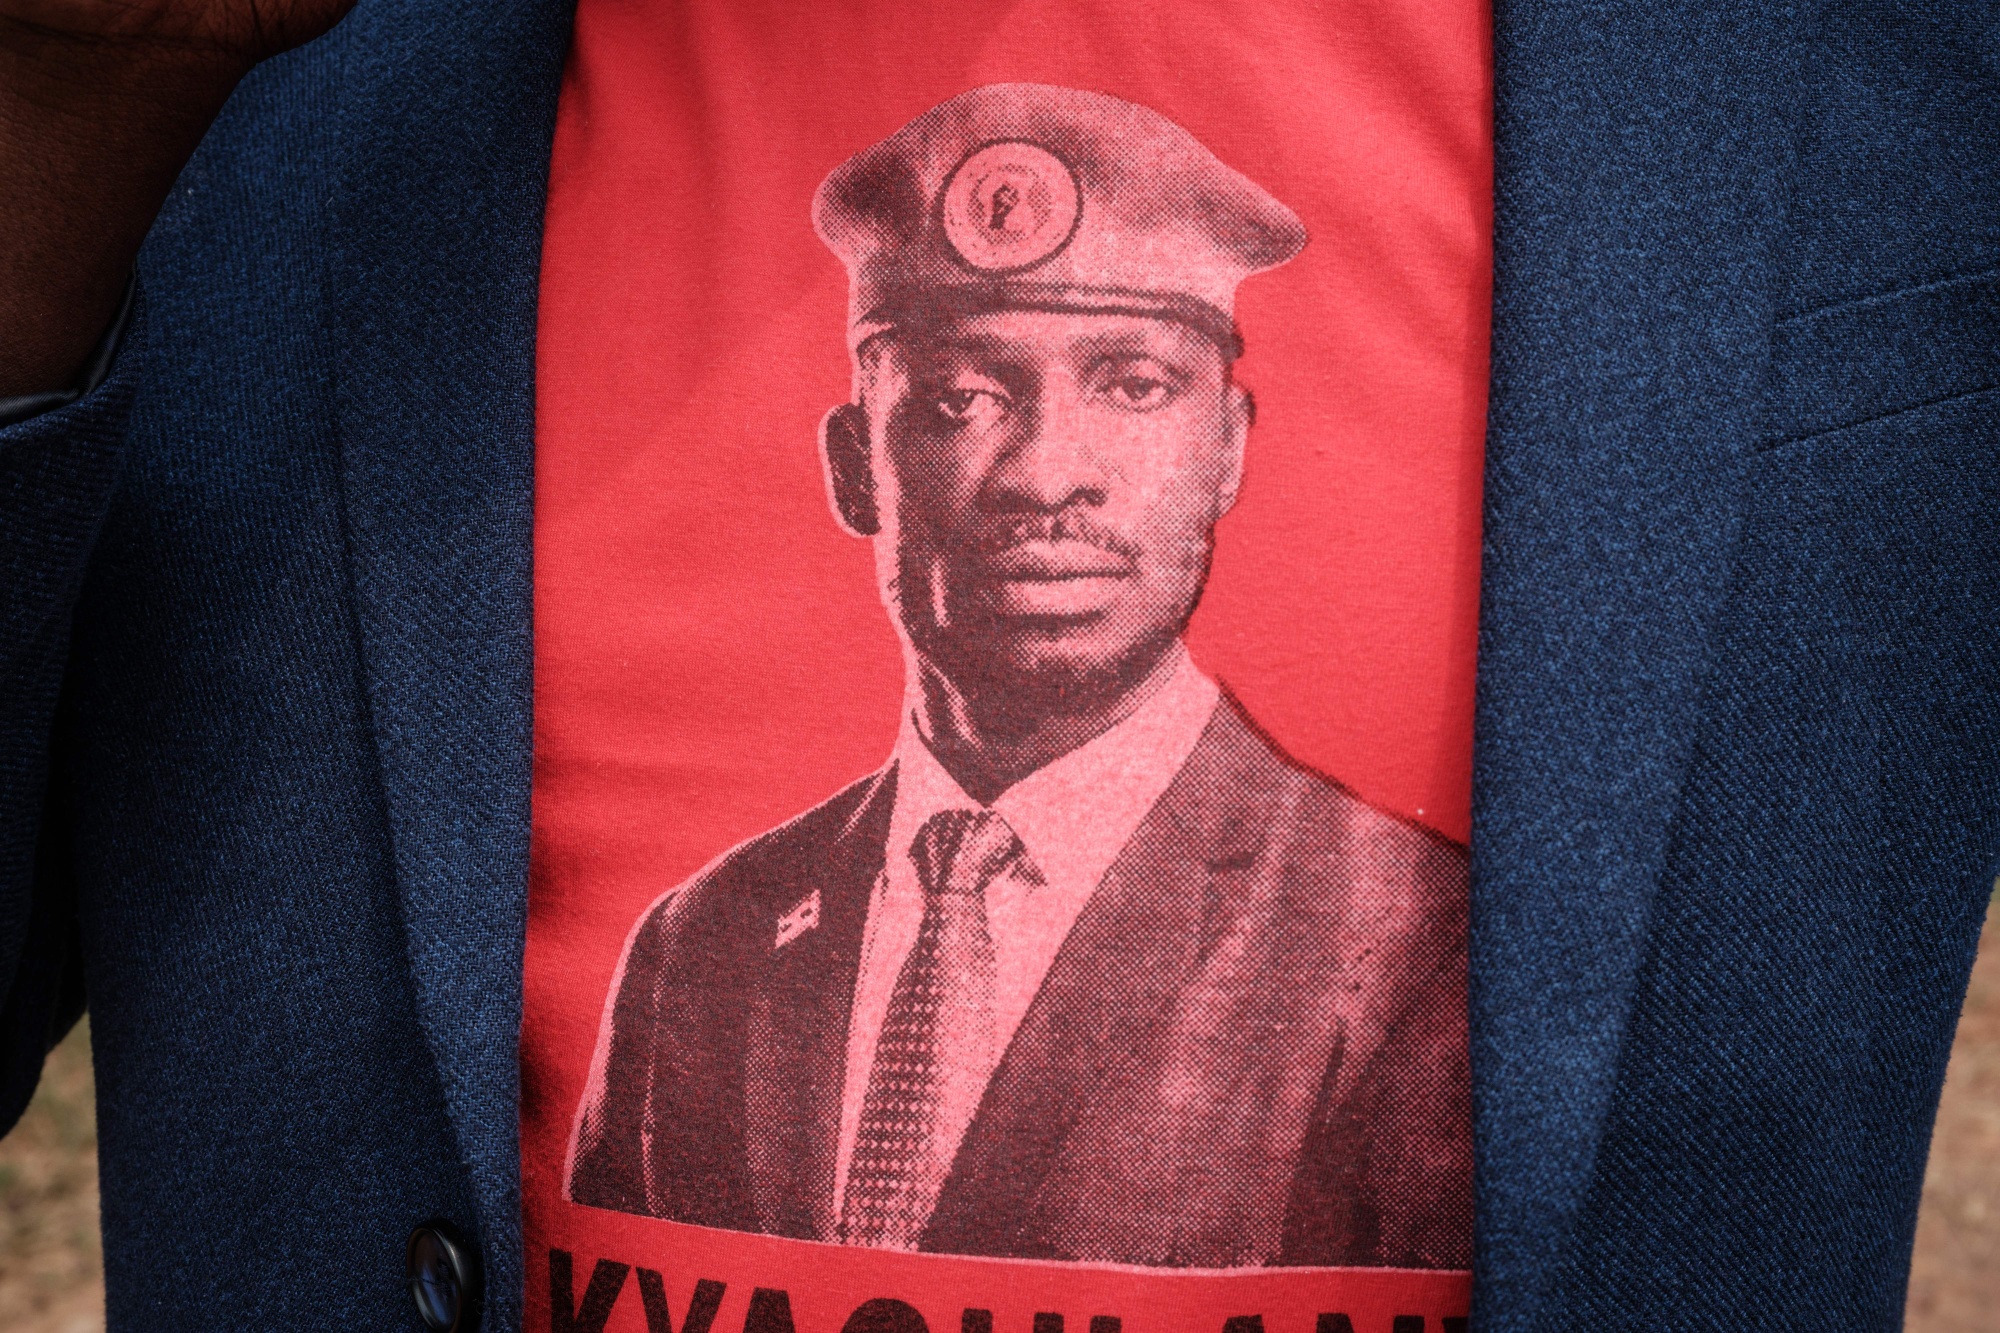 A T-shirt with printed portrait of Uganda’s opposition leader Robert Kyagulanyi, also known as Bobi Wine.